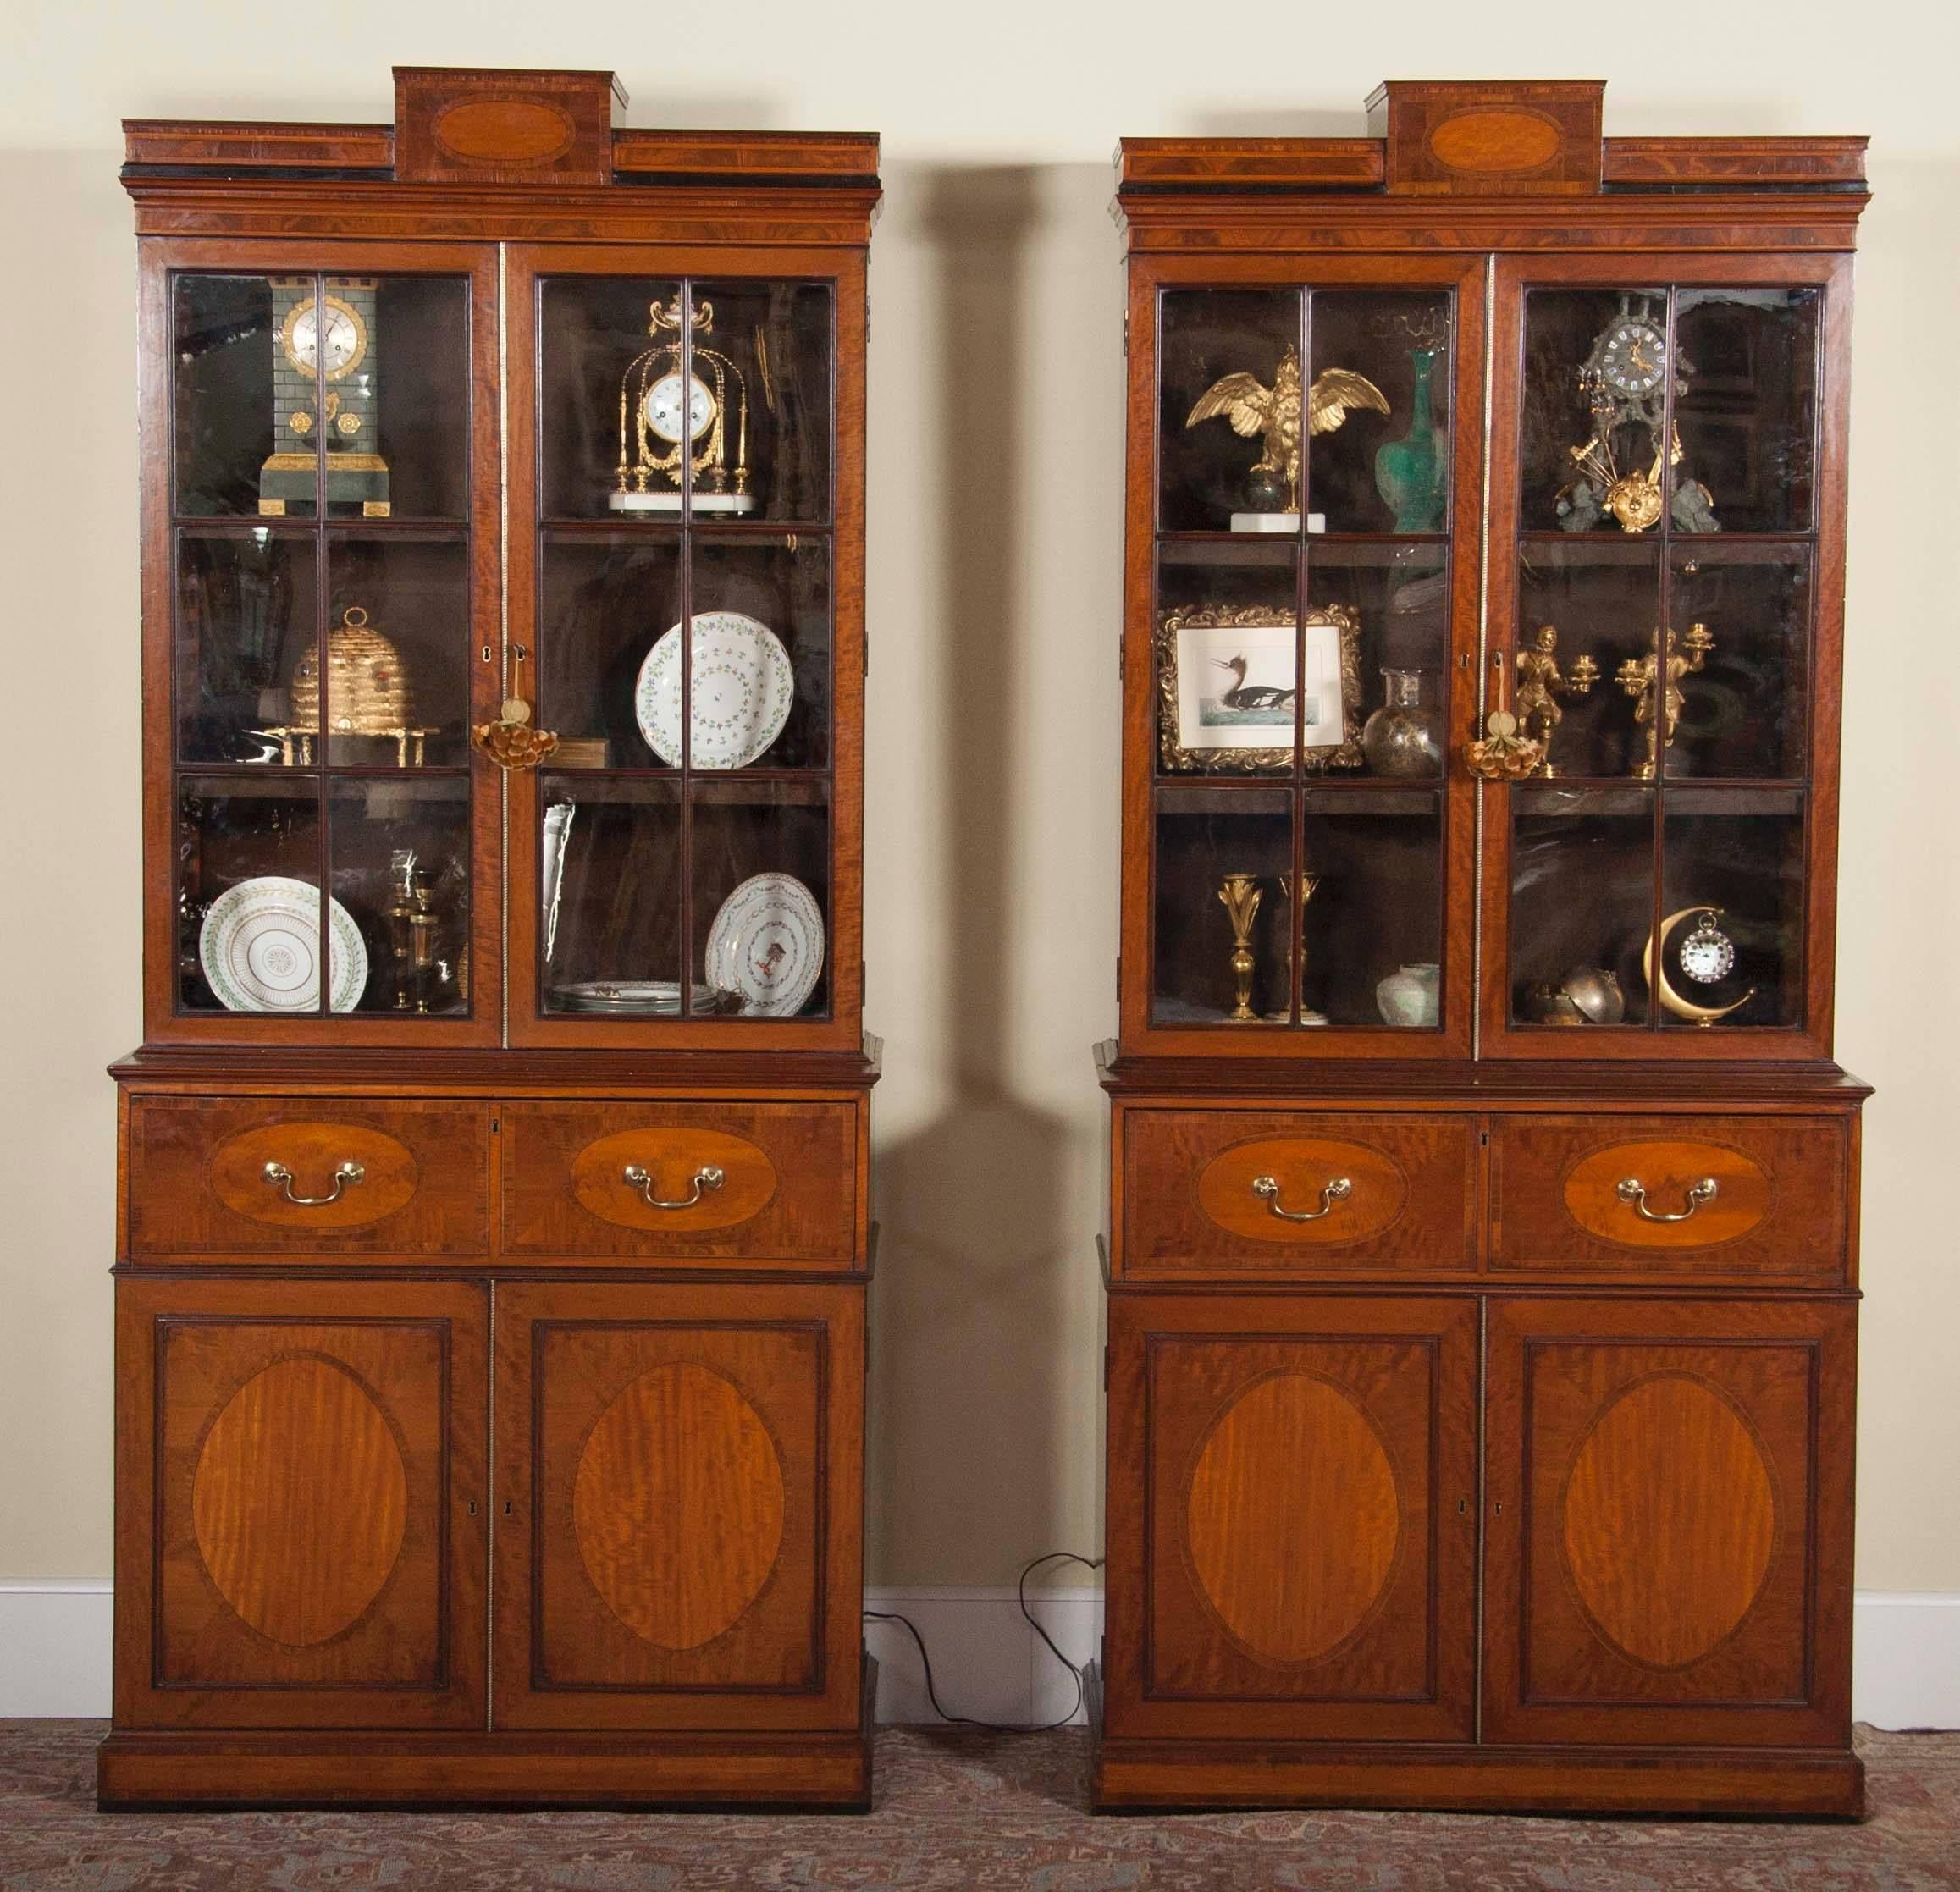 A rare near pair of English Regency period secretary or bookcases with rosewood, ebony, mahogany and satinwood inlay. The fitted drawers in the fall front are slightly different in color as is the leather inside. The number of rings turned in the